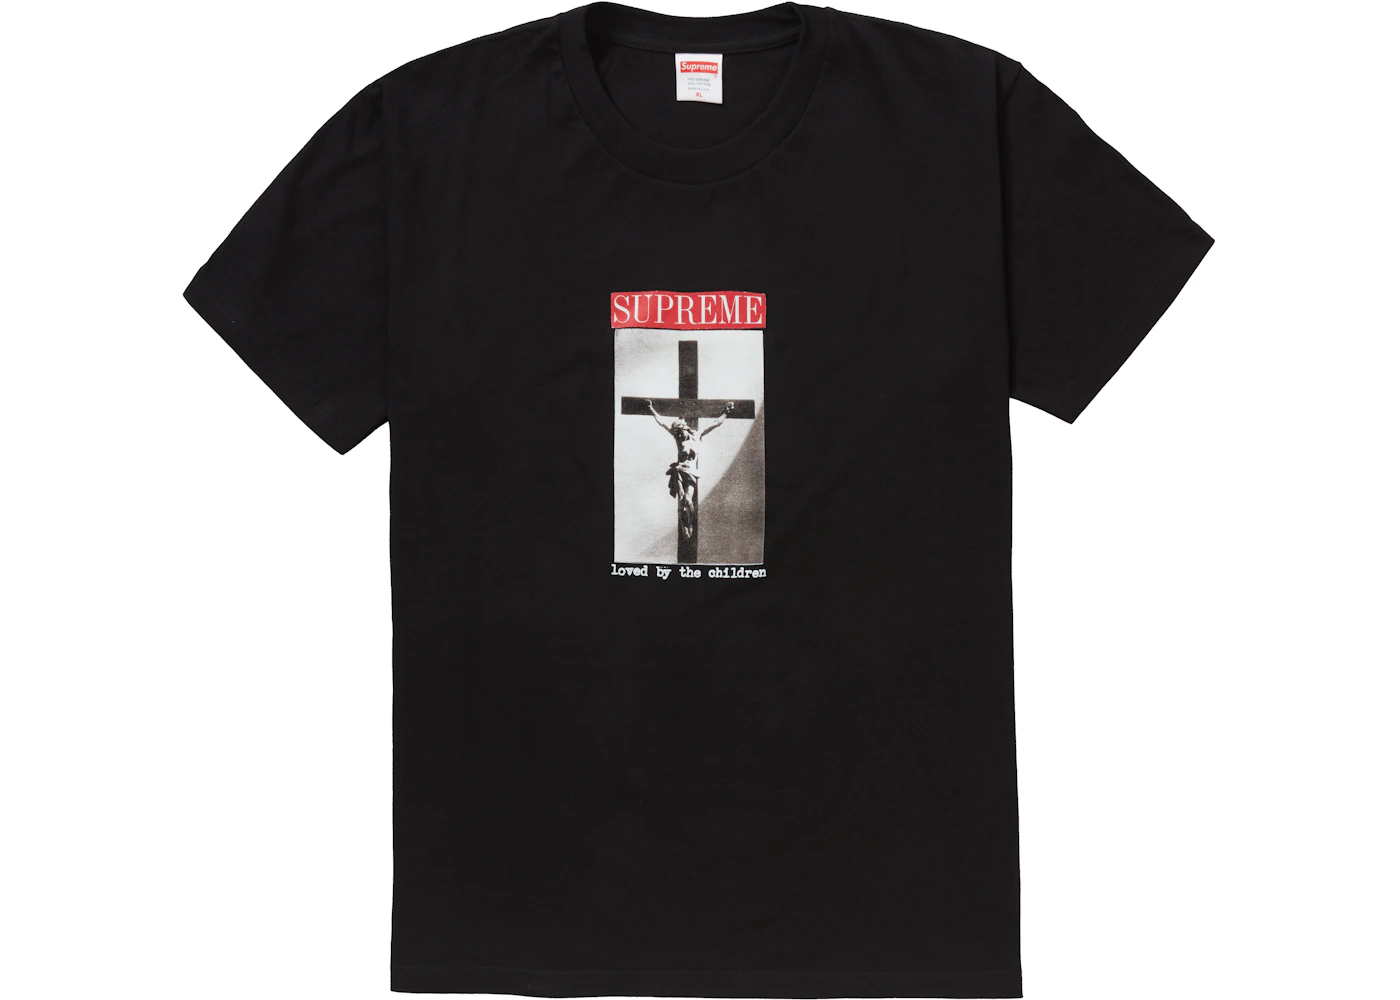 Supreme Loved By The Children Tee Black Men's - SS20 - US